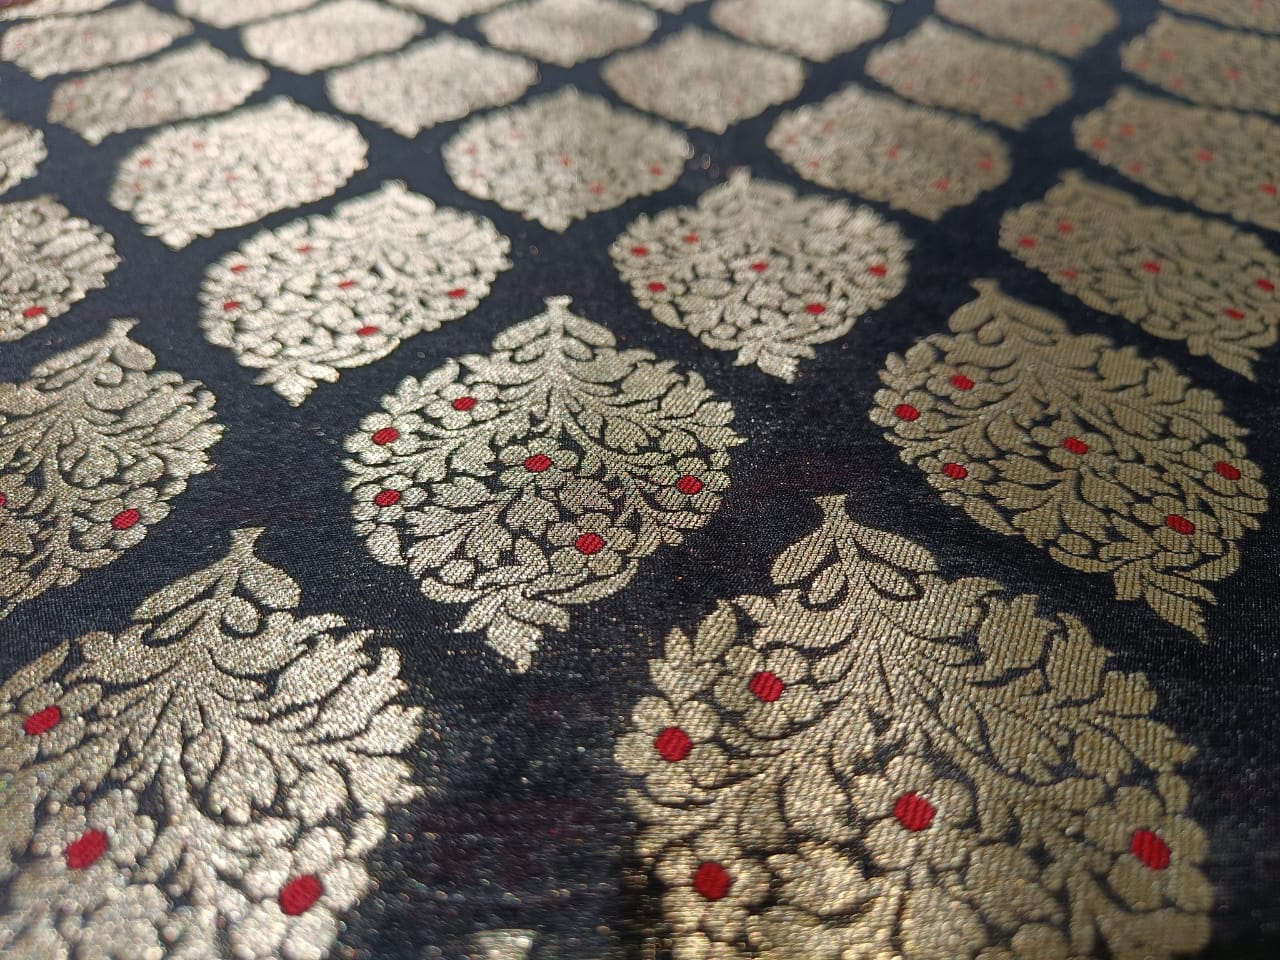 Brocade jacquard fabric black red and gold color 44" wide BRO839[1]